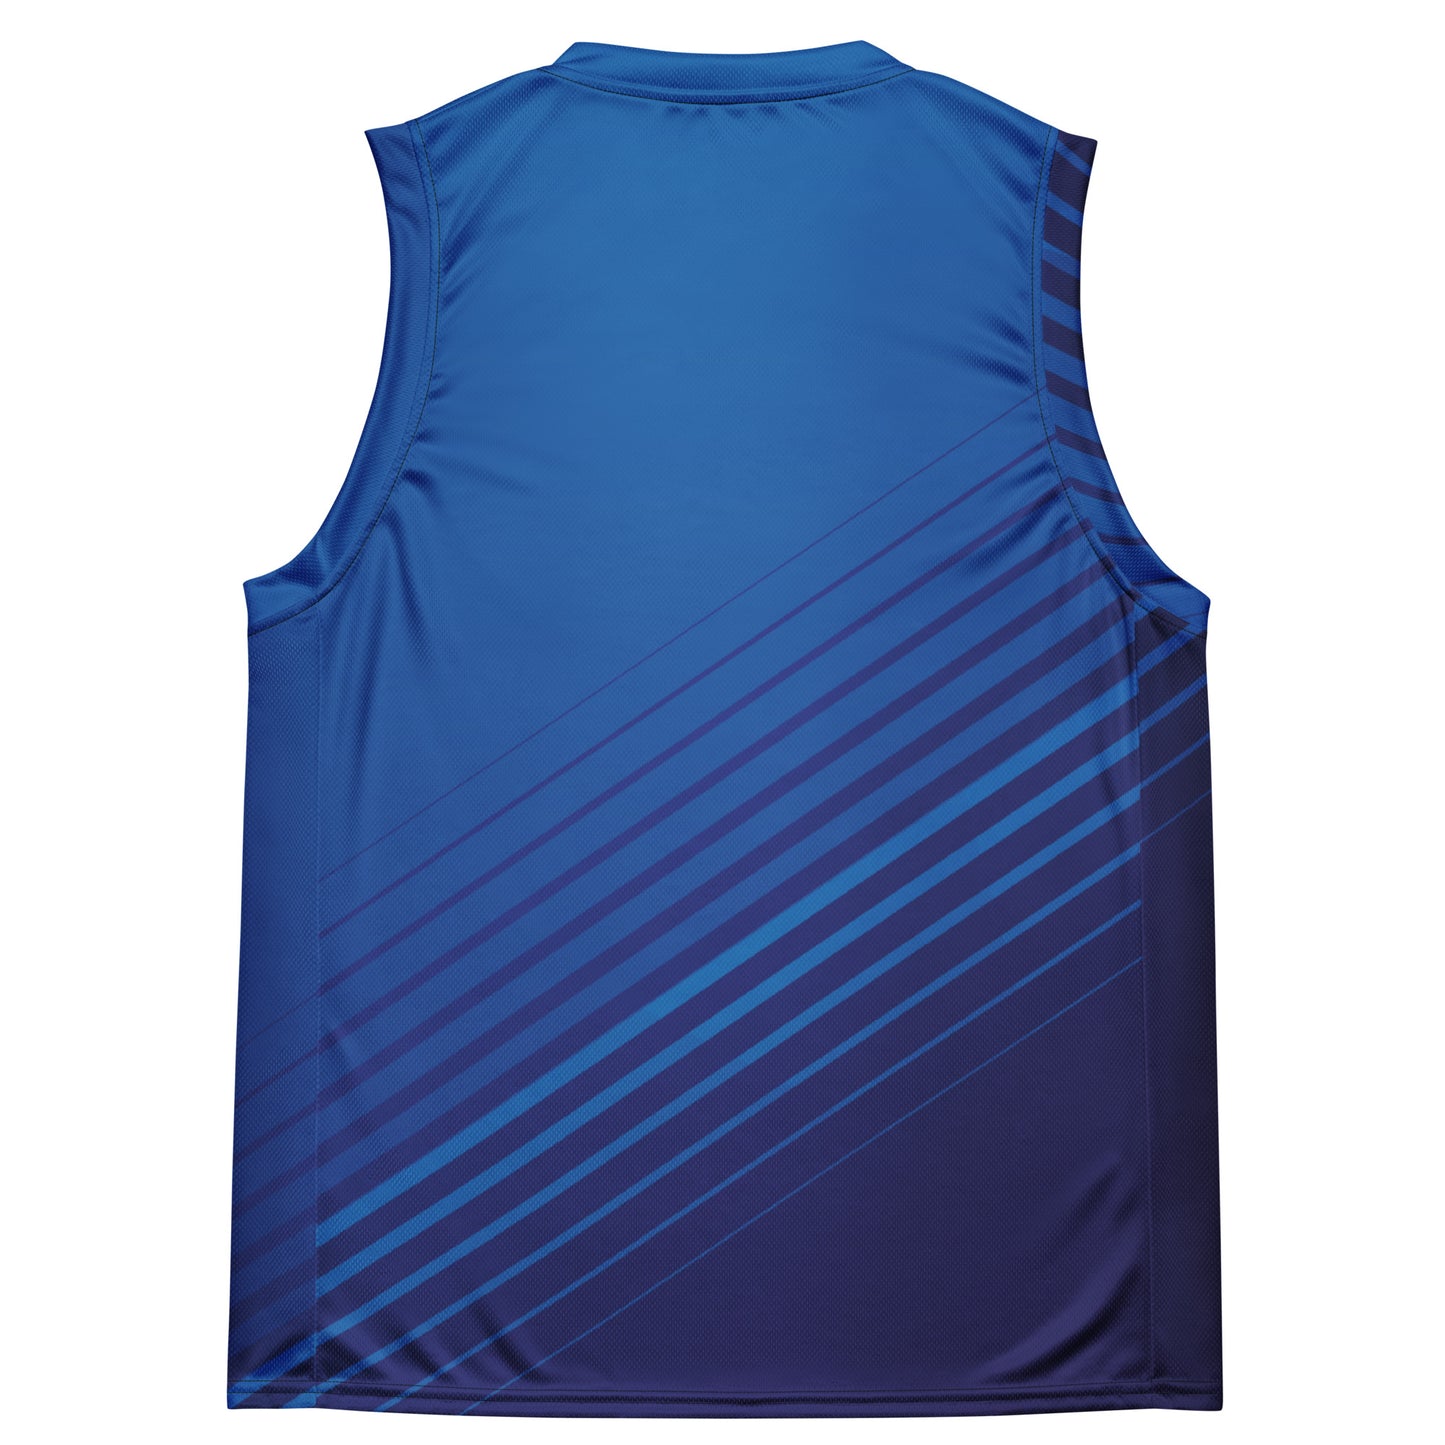 SPRINGLOADED FLYBALL Recycled unisex basketball jersey